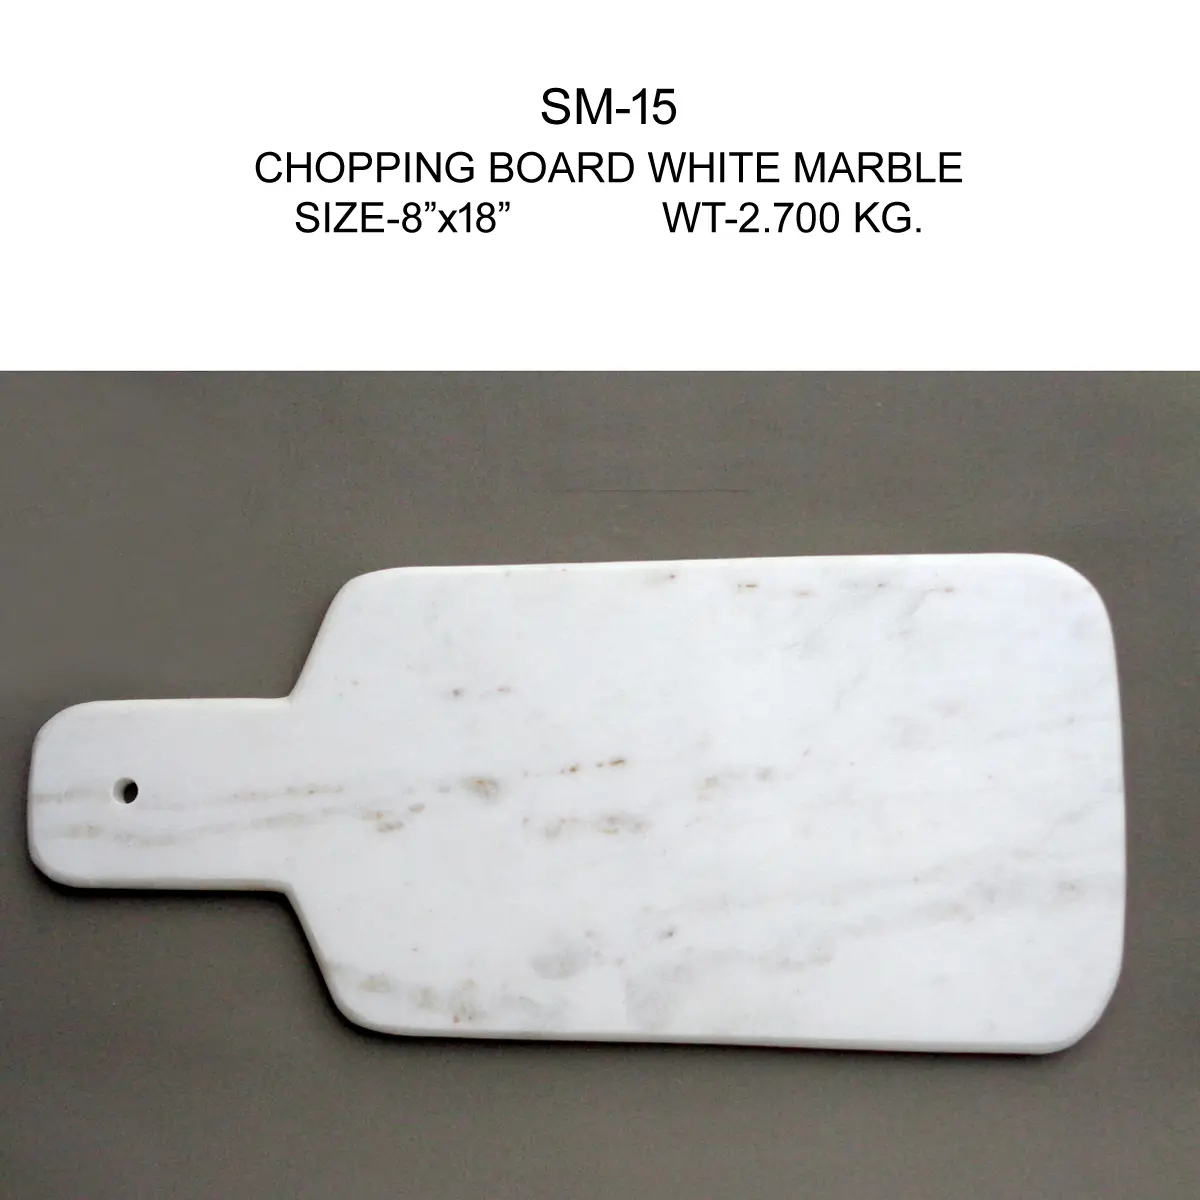 RACTANGLE CHOPPING BOARD WITH MOLDING
WHITE MARBLE WITH HANDLE